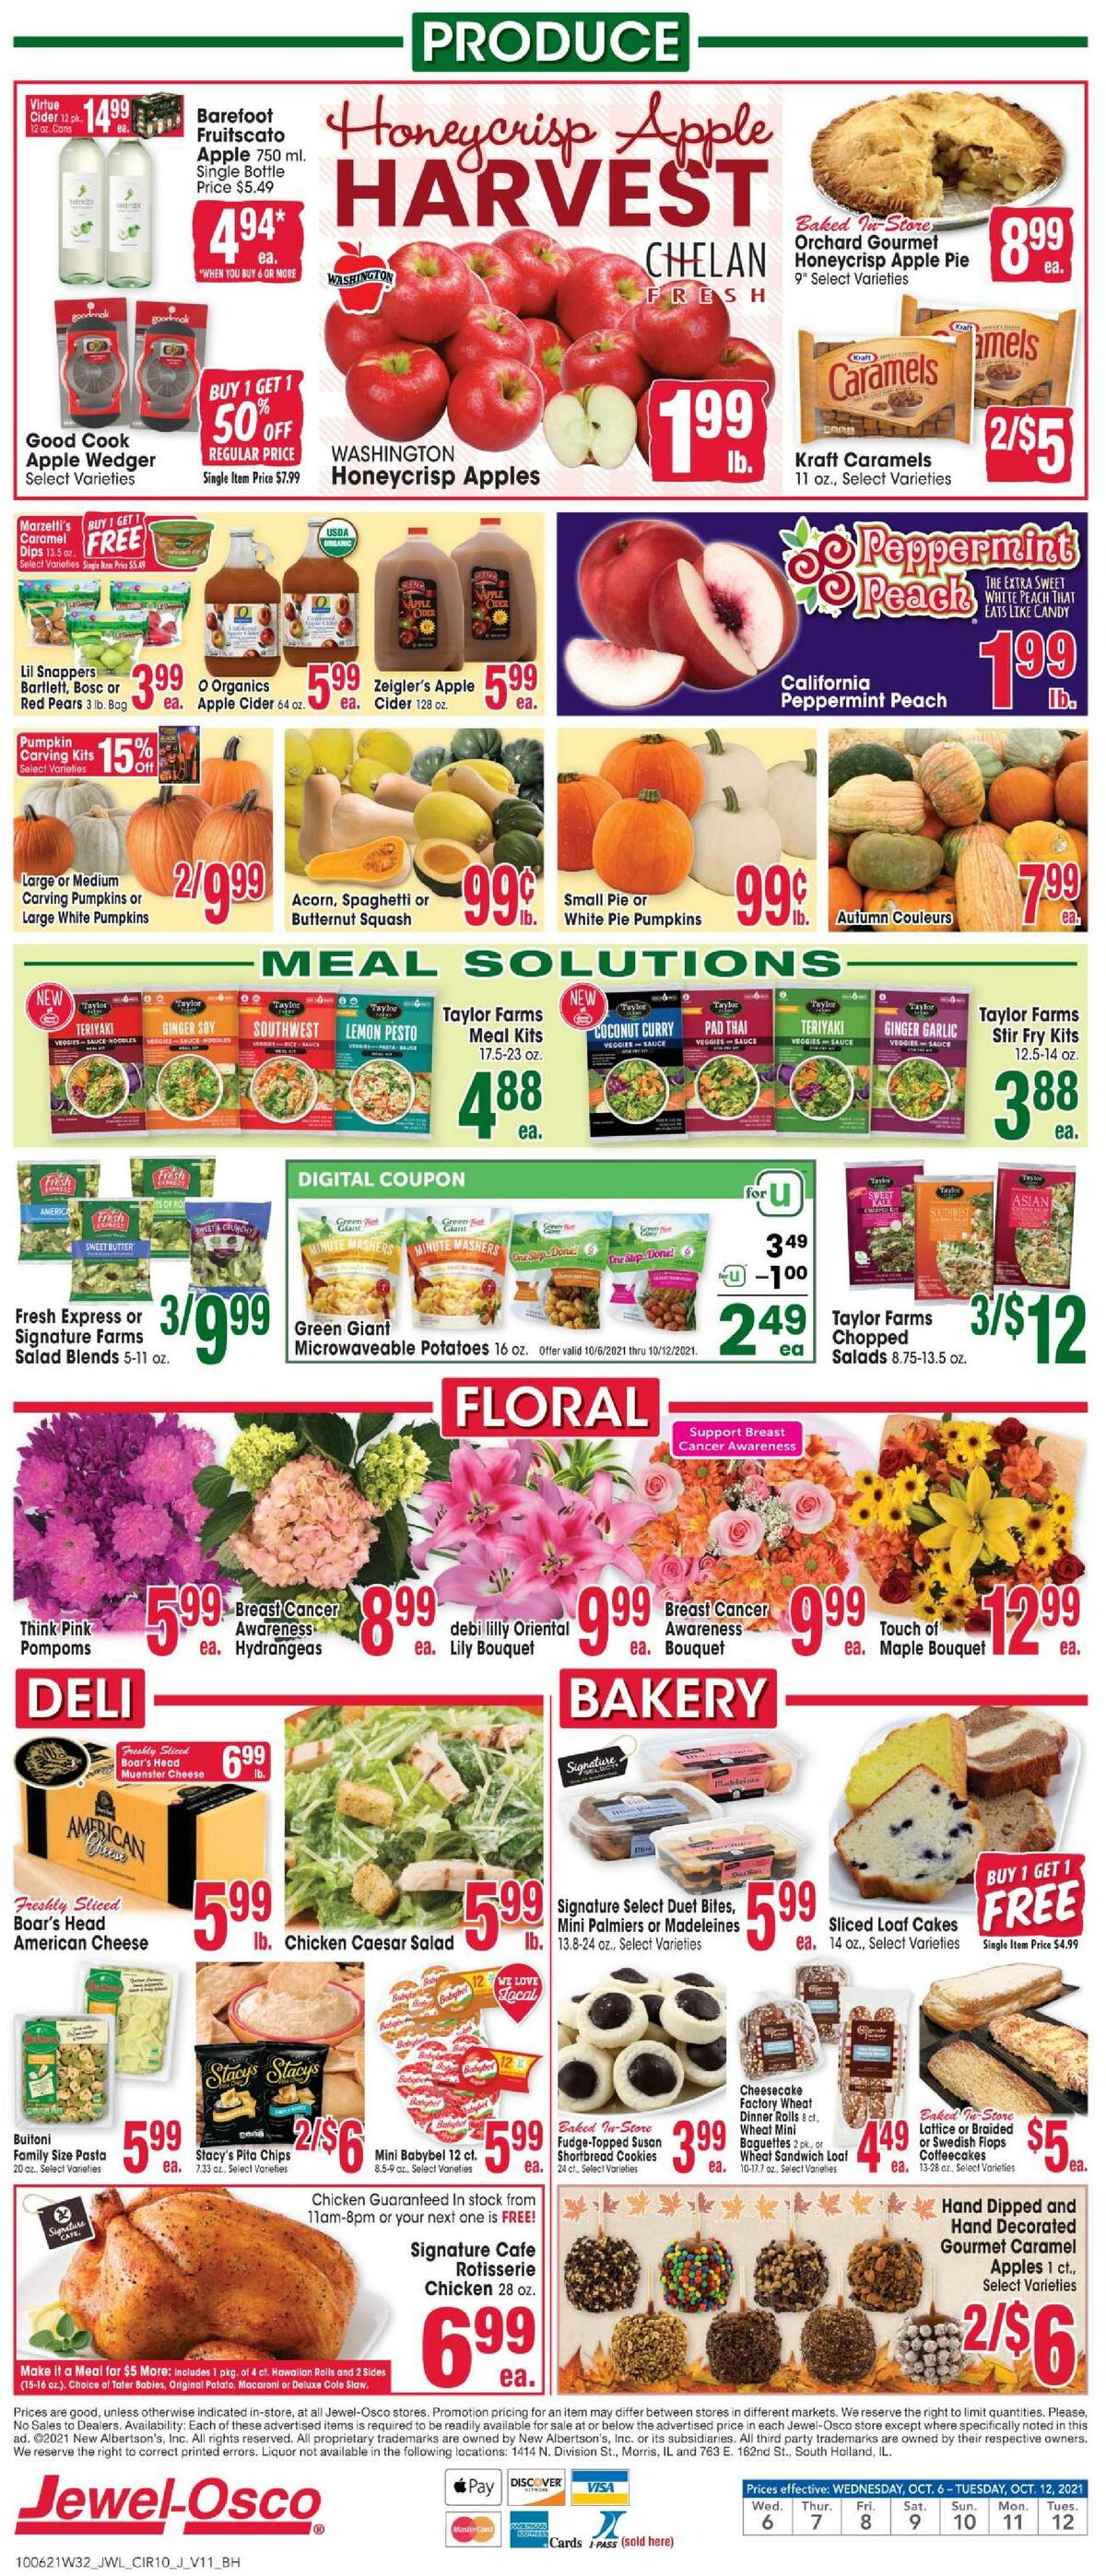 Jewel Osco Weekly Ad from October 6